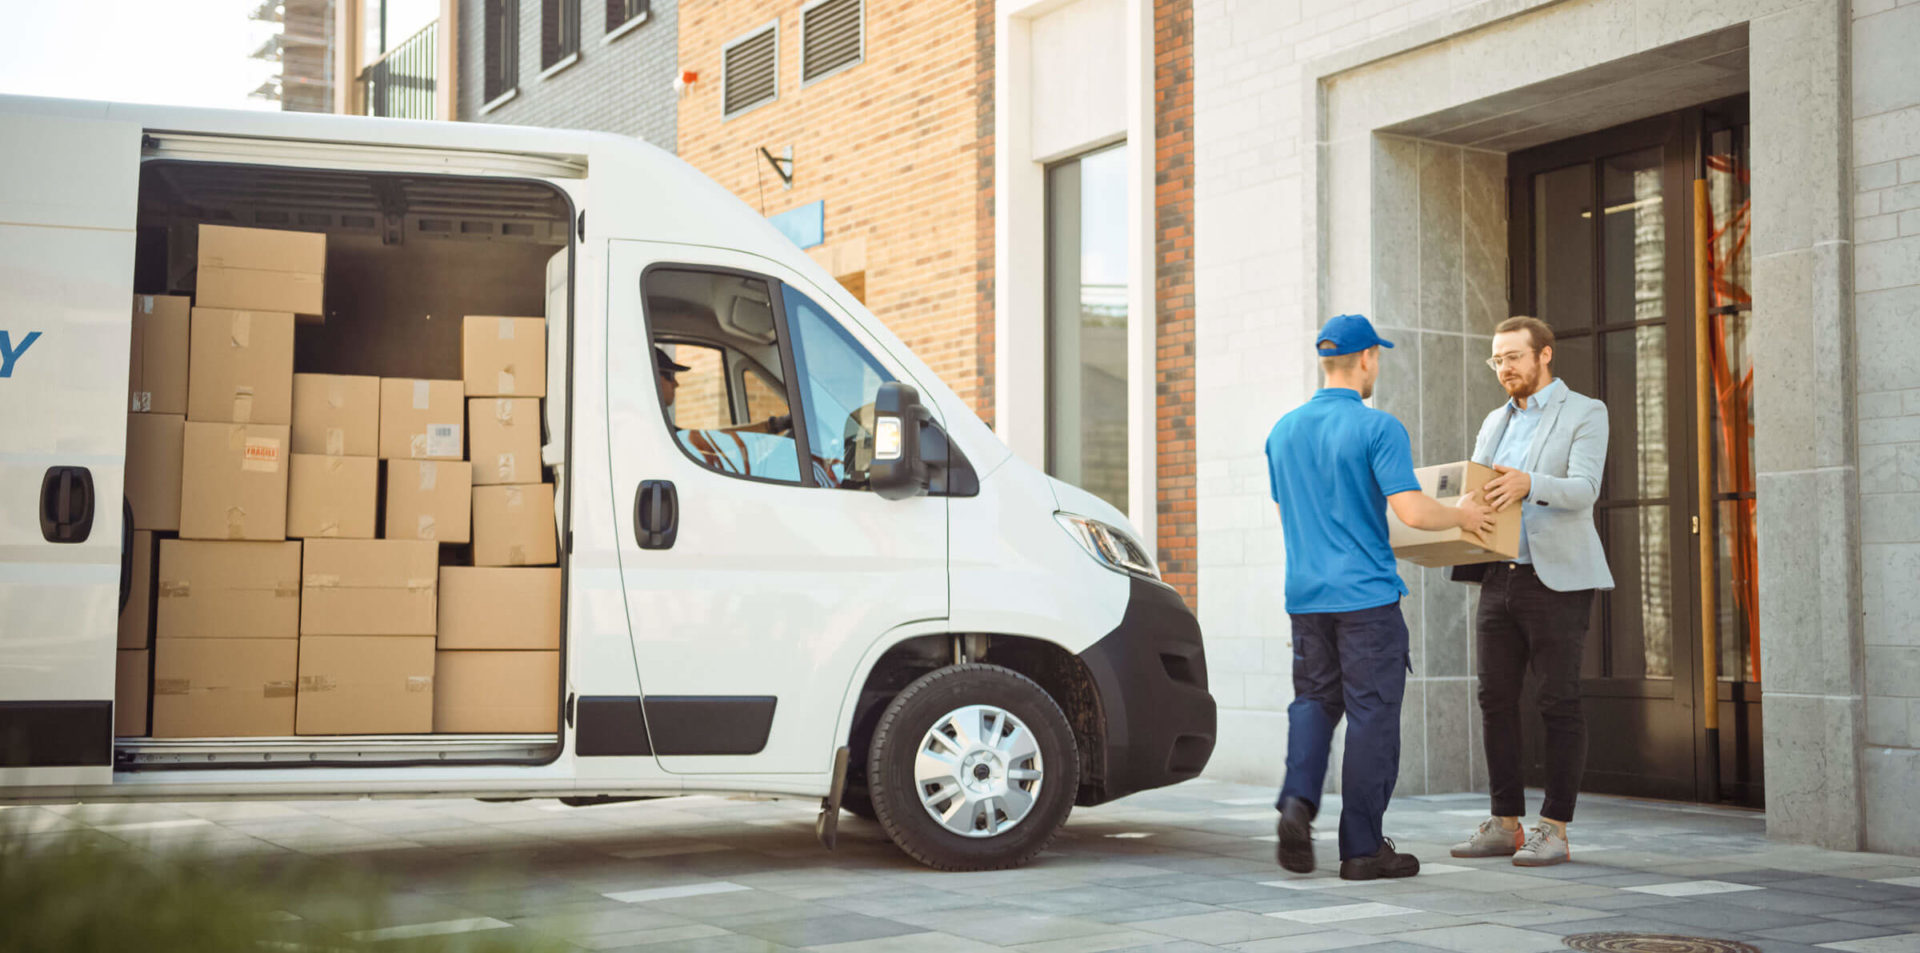 man deliverying packages with package delivery truck